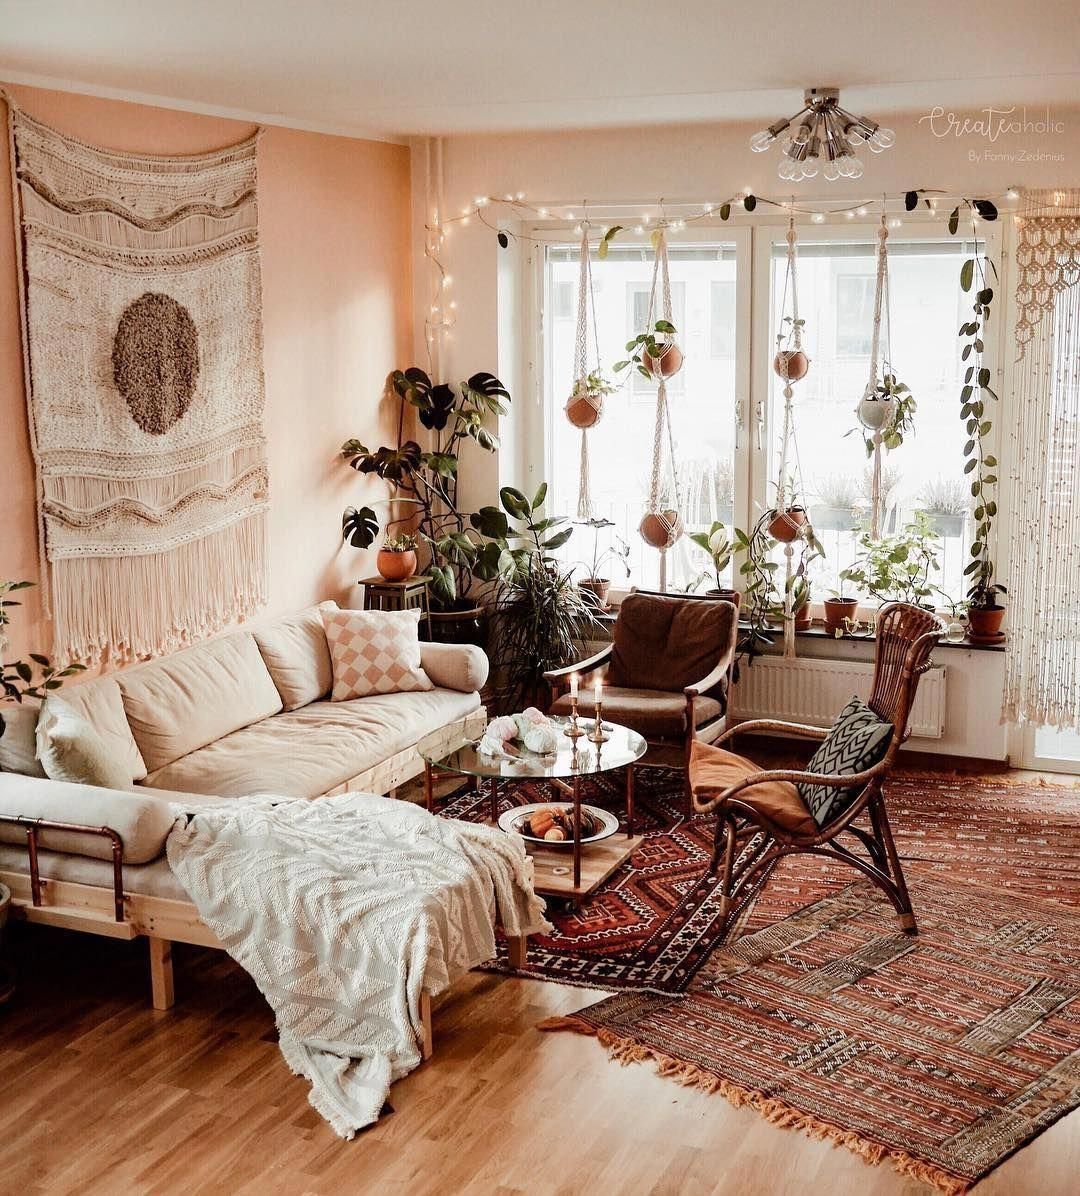 Bohemian Furniture And Decor: How To Achieve The Look